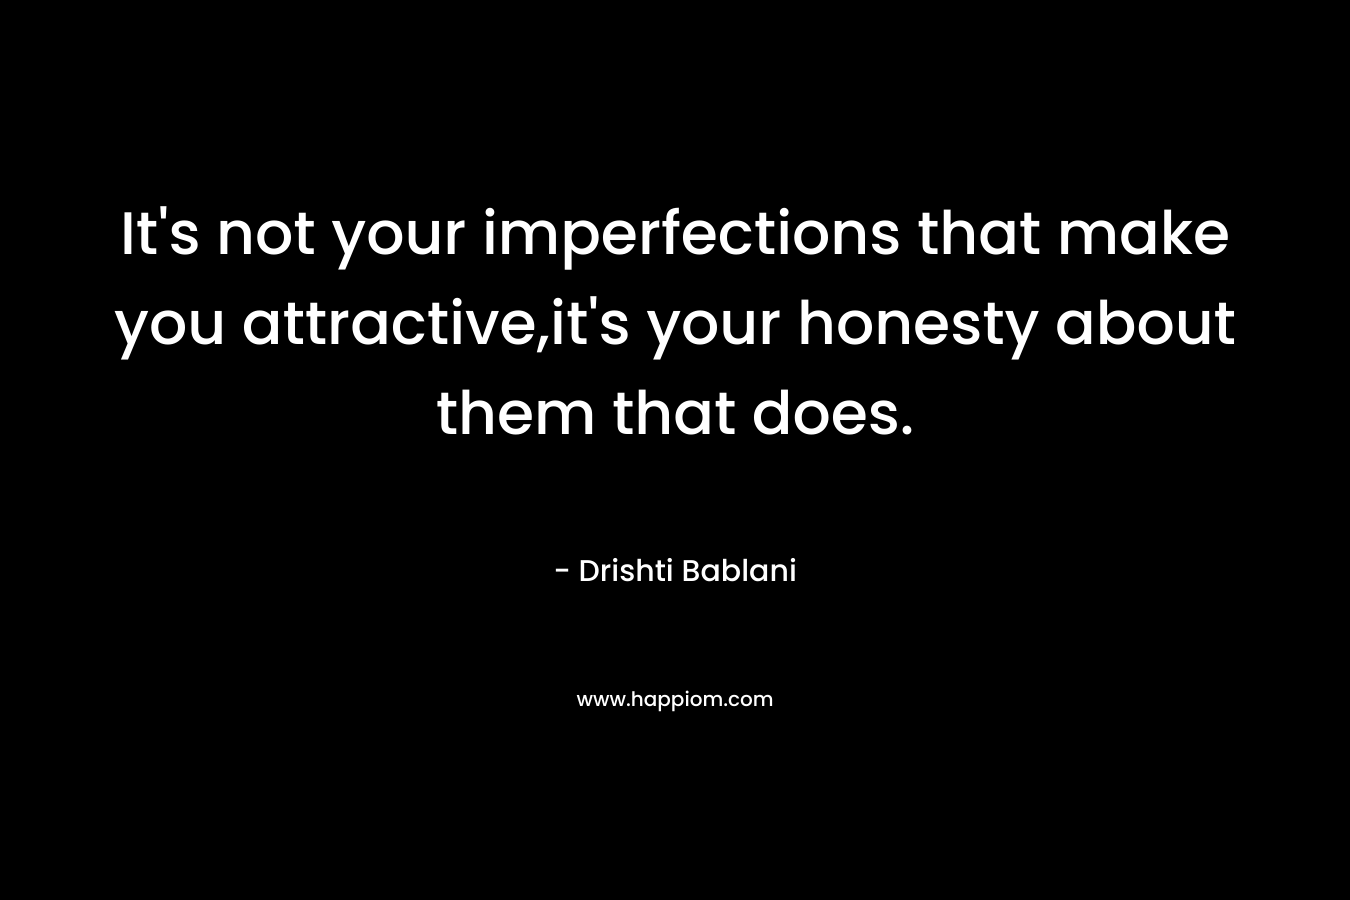 It’s not your imperfections that make you attractive,it’s your honesty about them that does. – Drishti Bablani